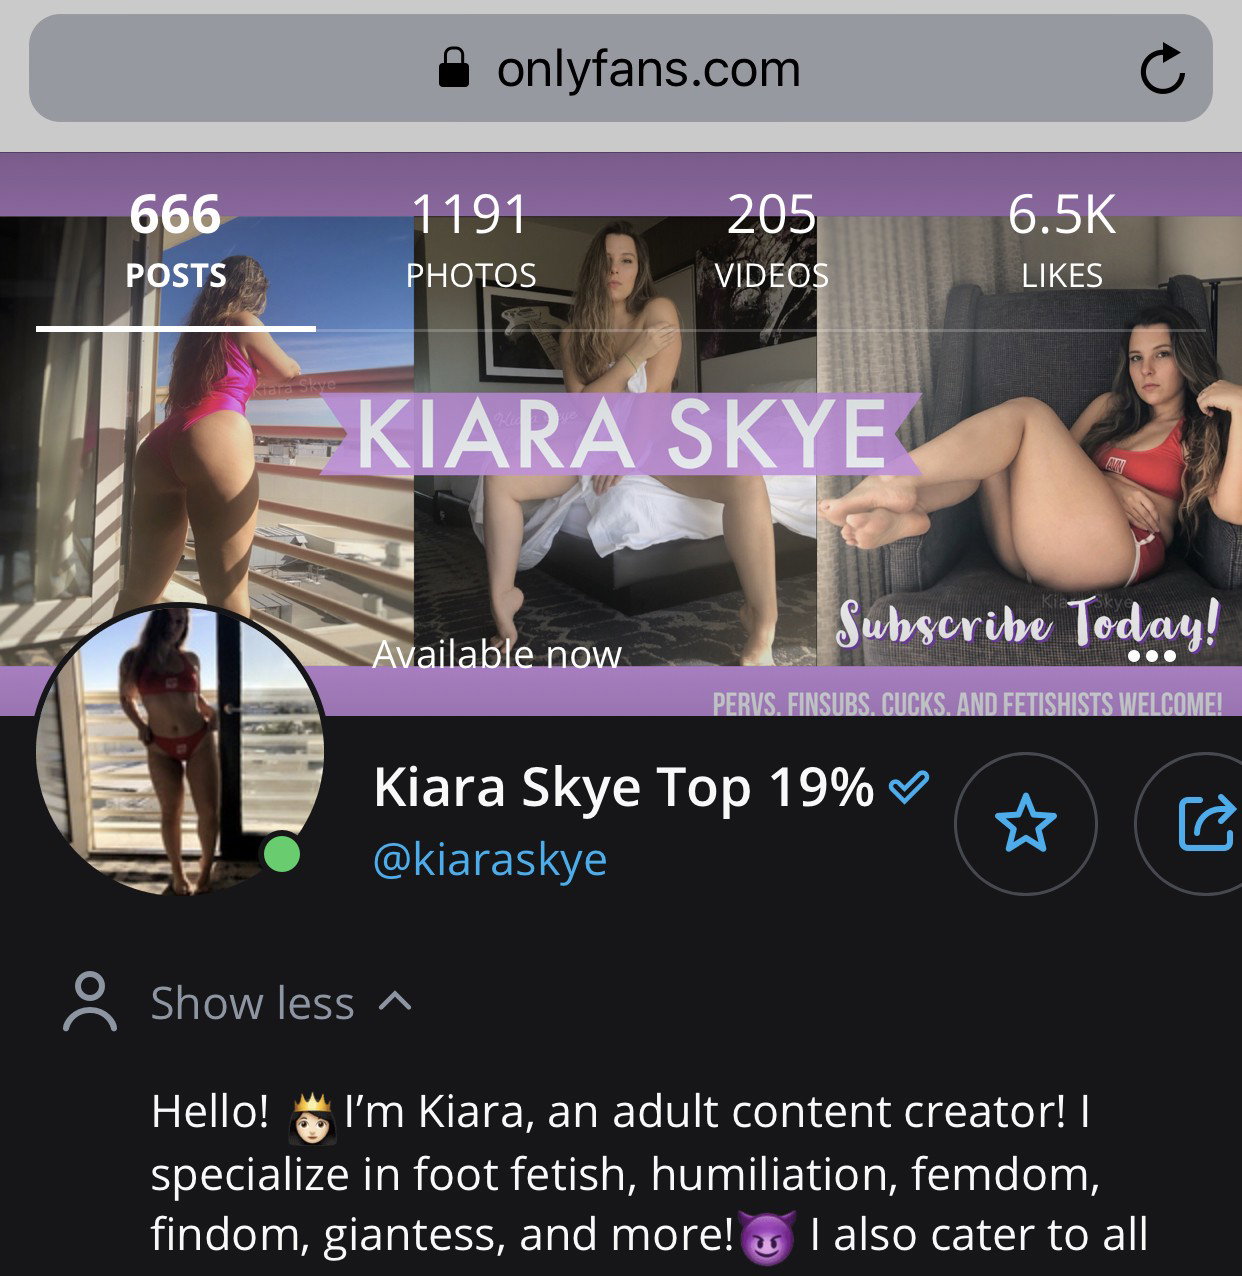 Watch the Photo by Kiara Skye with the username @KiaraSkye, who is a star user, posted on March 27, 2020. The post is about the topic OnlyFans Verified Models. and the text says '💸 Just reduced my OnlyFans price during this crazy time! Let me distract you!👸🏻

👉 https://kiarafans.com

#findom #femdom #onlyfans #fansite #quarantine #chill #feet #footfetish #amateur #cheap #curvy #thick #coronavirus #ass #tits #'